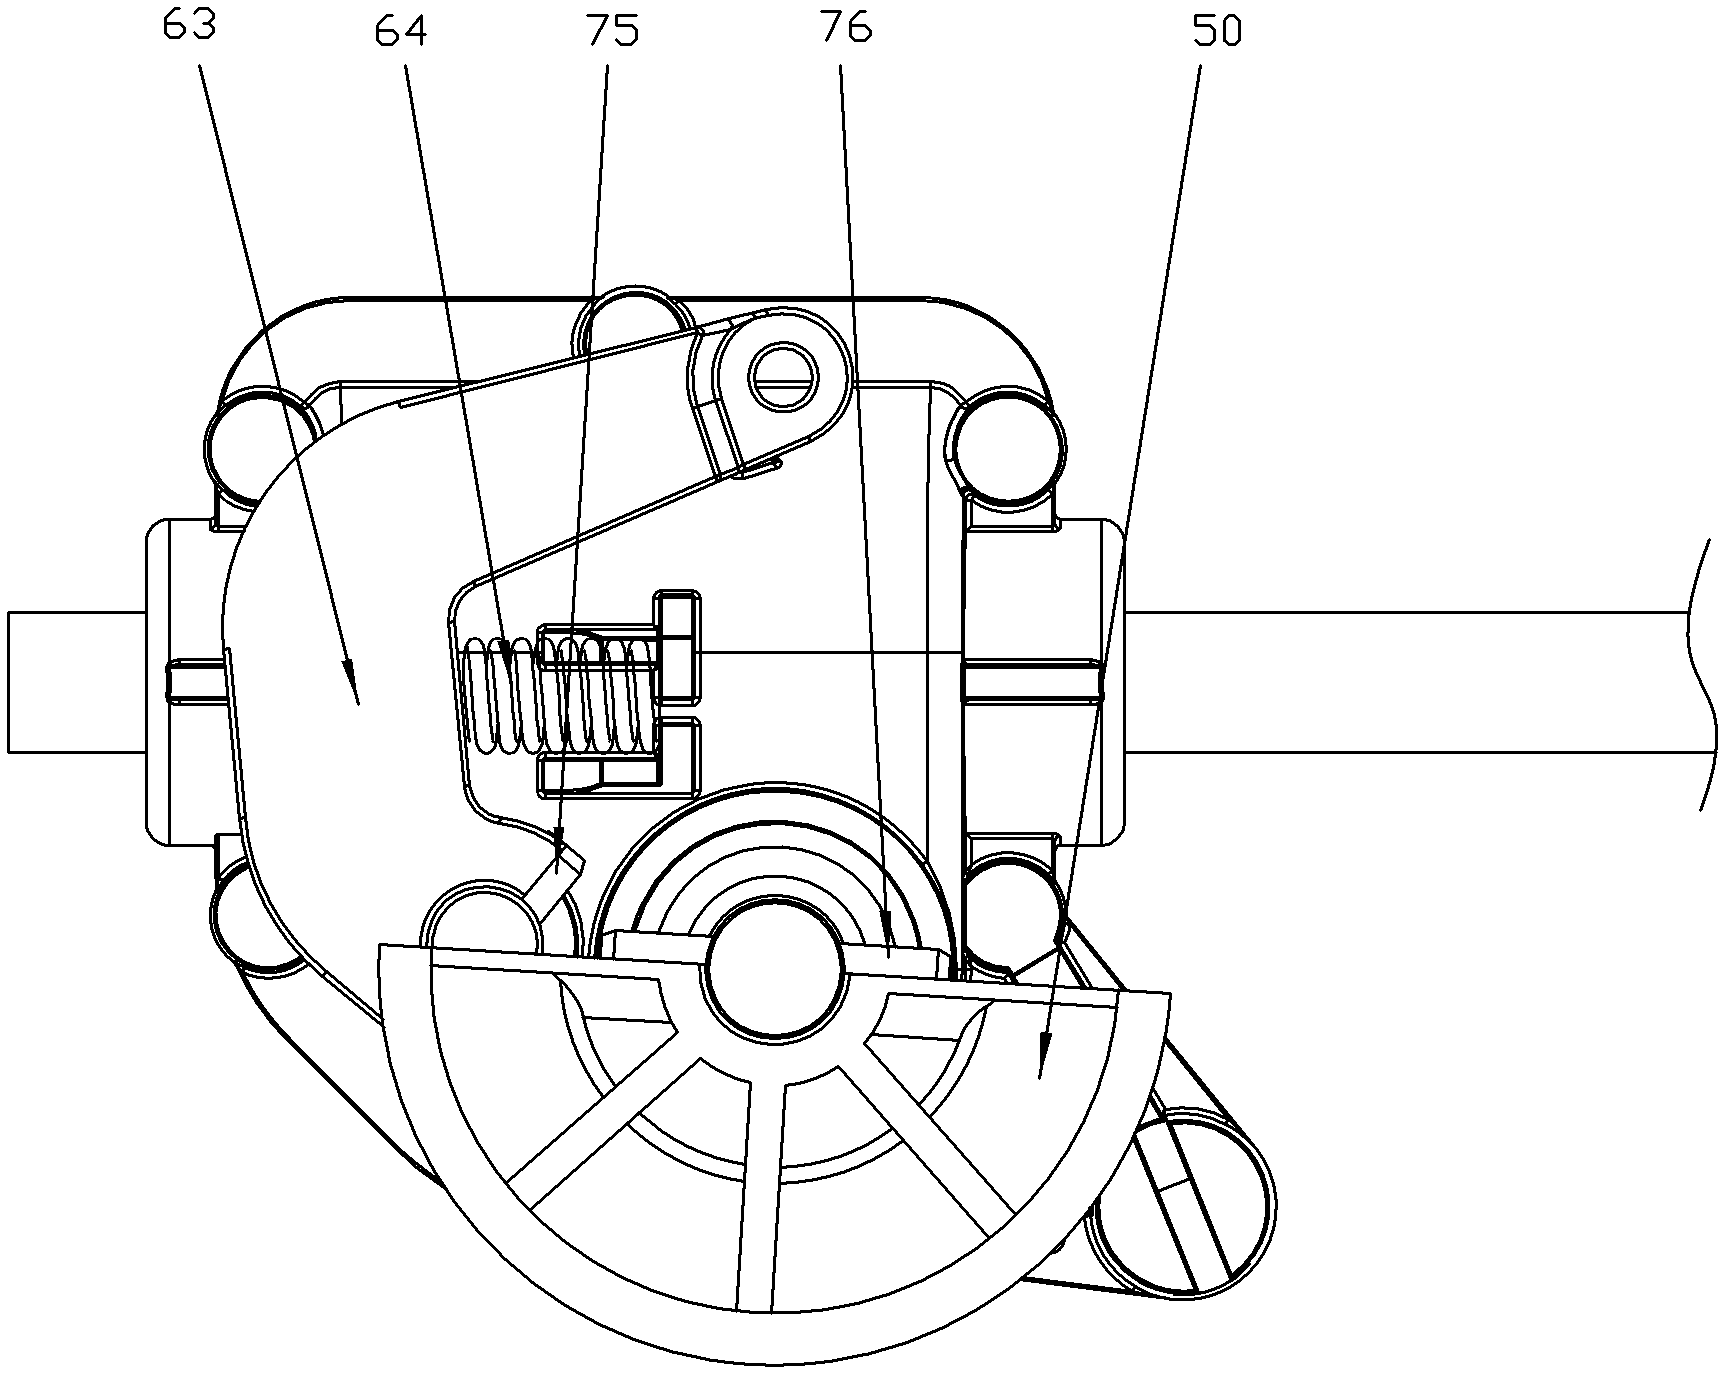 Clutch transmission device of self-propelled mower